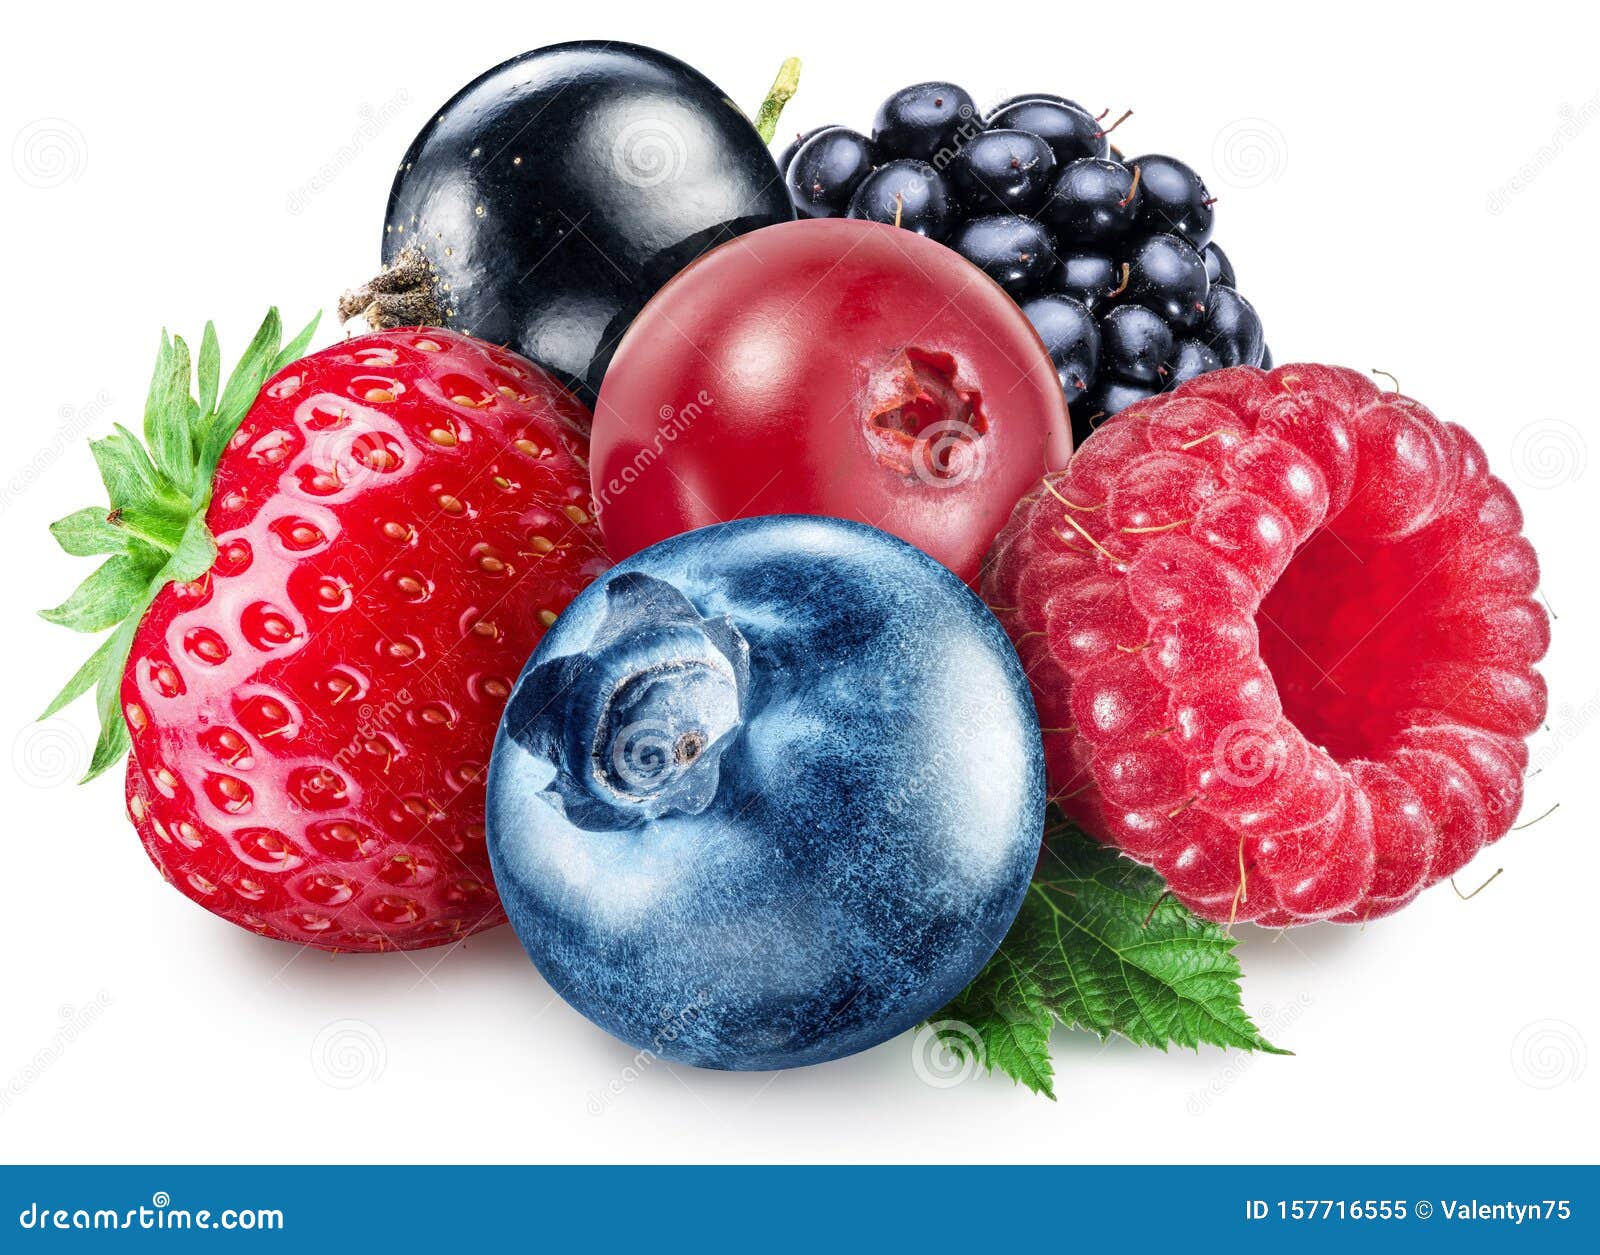 colorful group of mixed berries with leaves on white background. clipping path